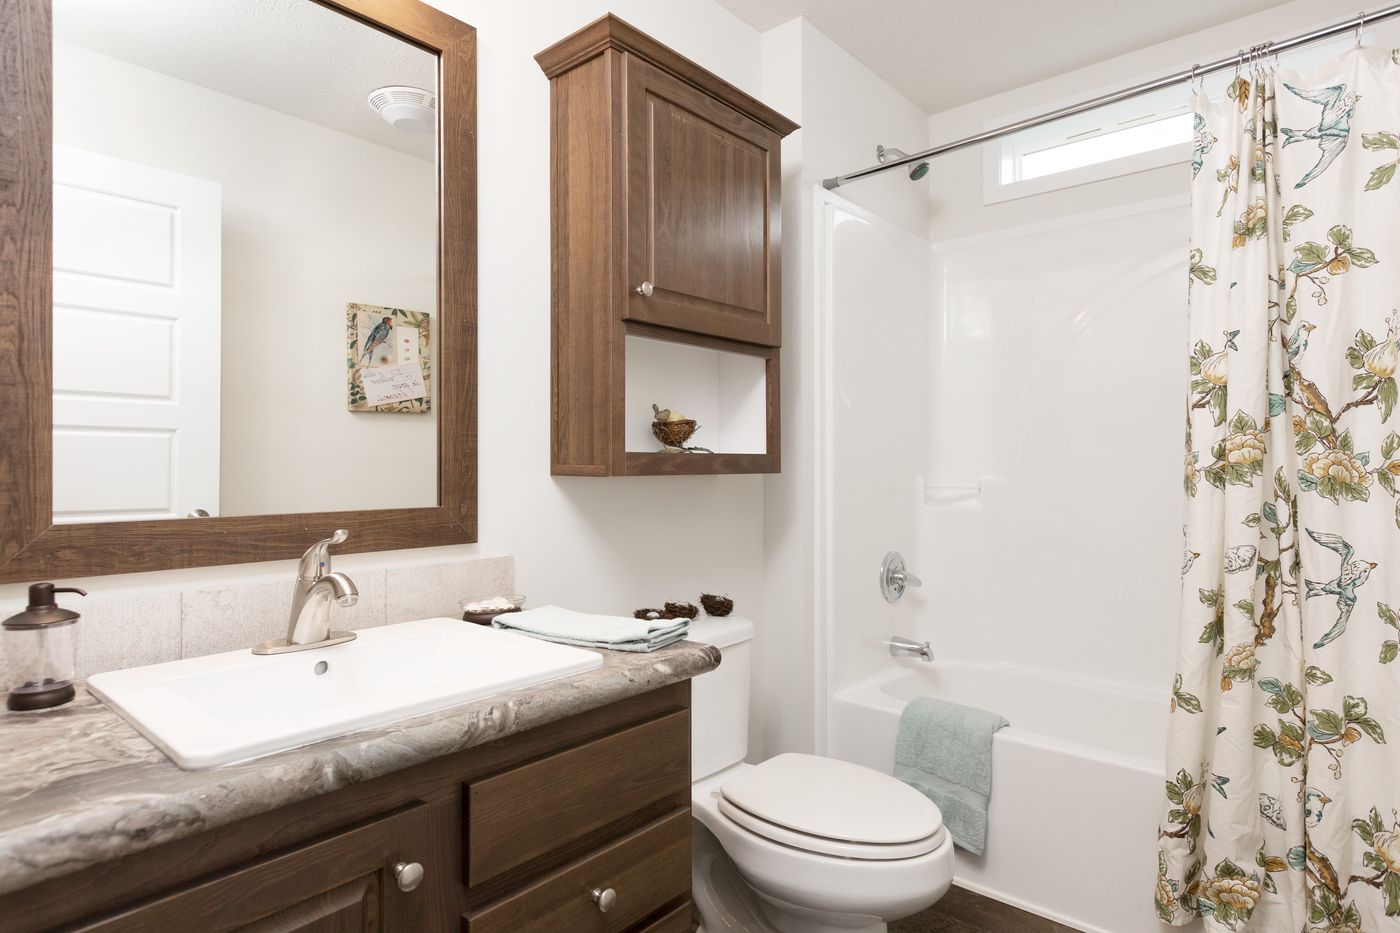 The MICHIGAN AVE 6028-MS026 SECT Guest Bathroom. This Manufactured Mobile Home features 3 bedrooms and 2 baths.